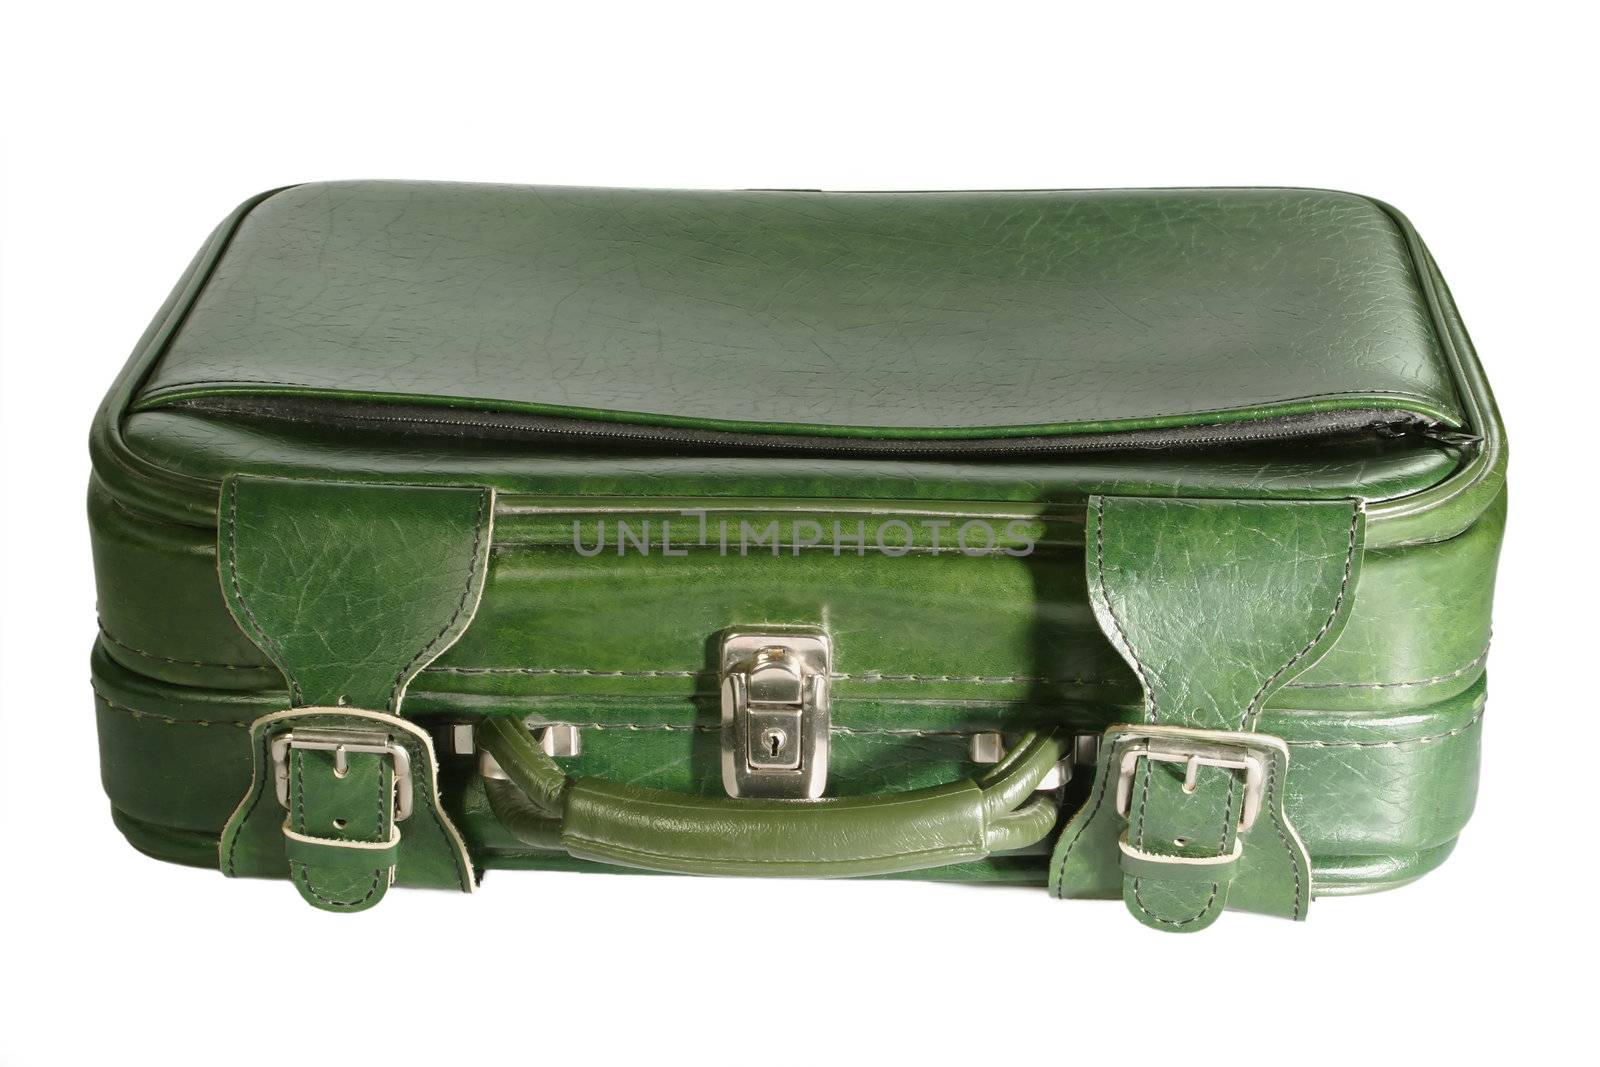 Green suitcase - isolated on white background